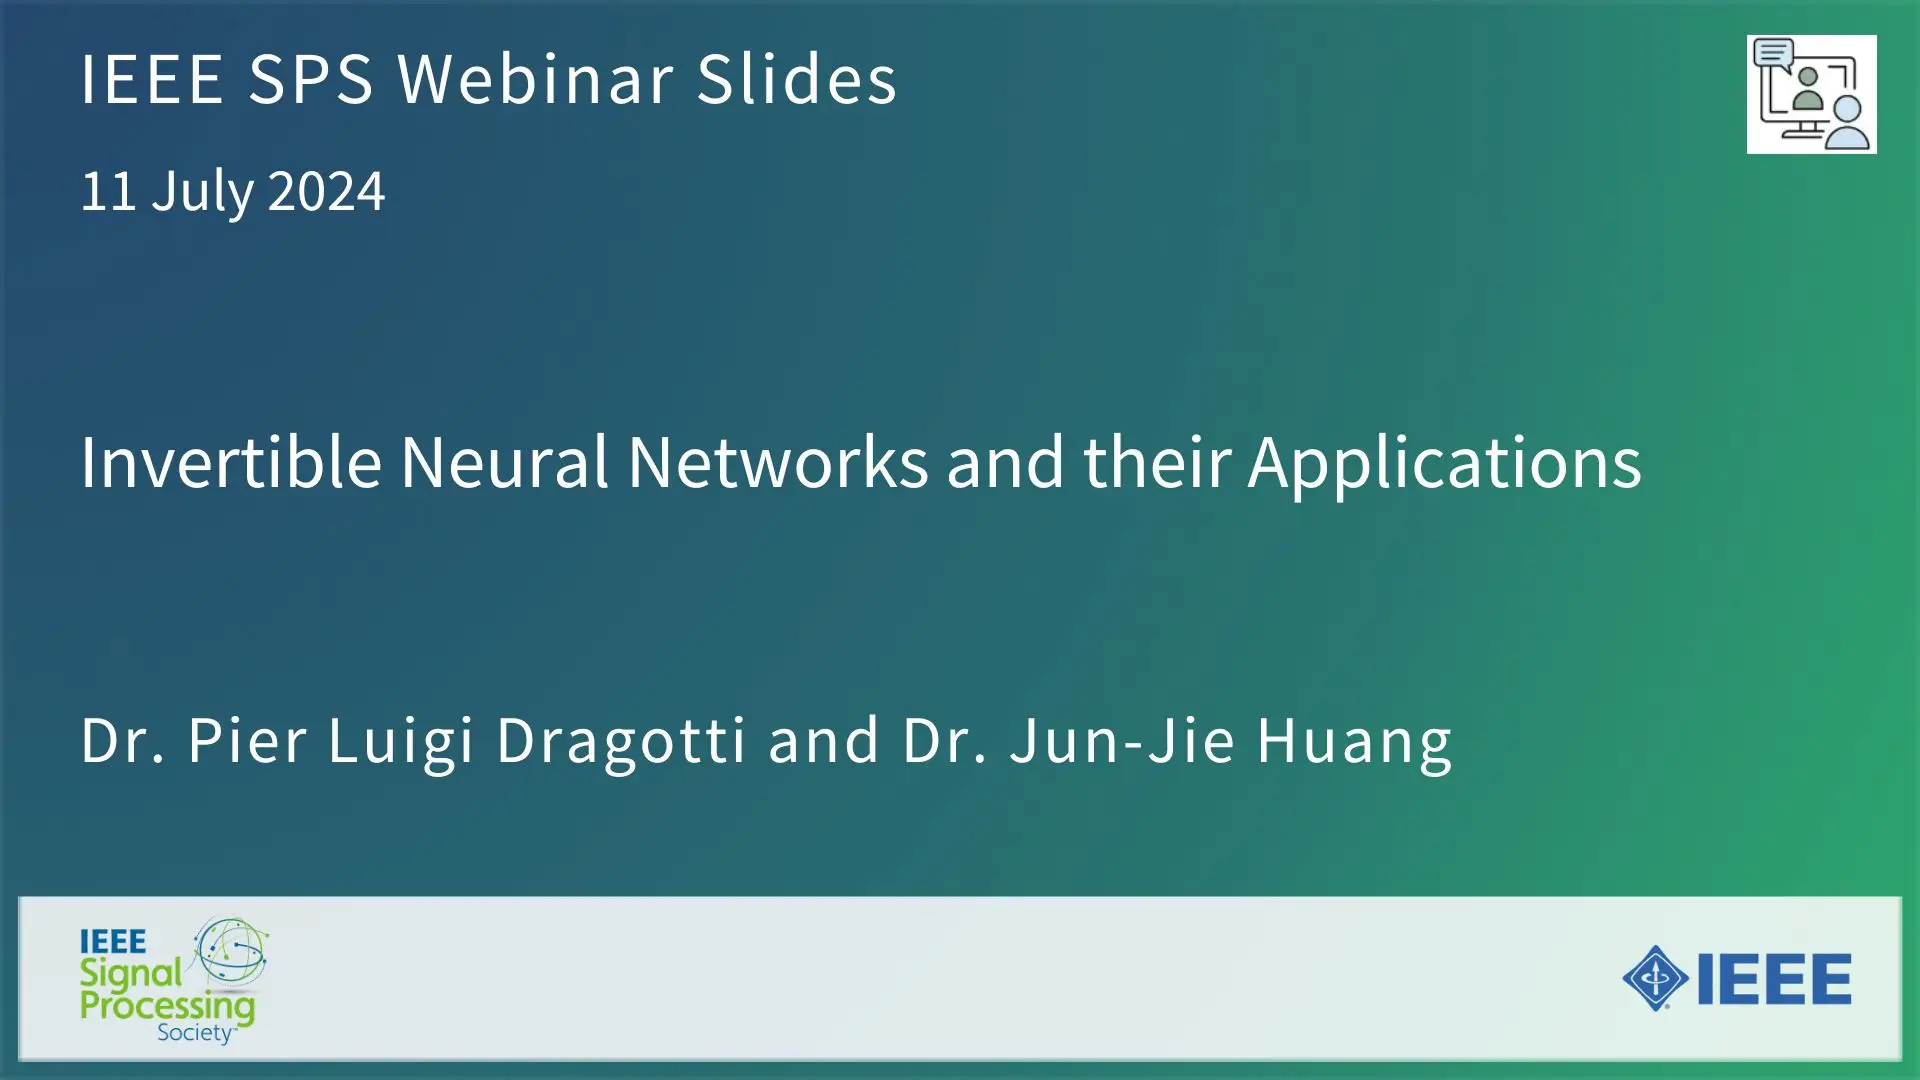 Slides: Invertible Neural Networks and their Applications